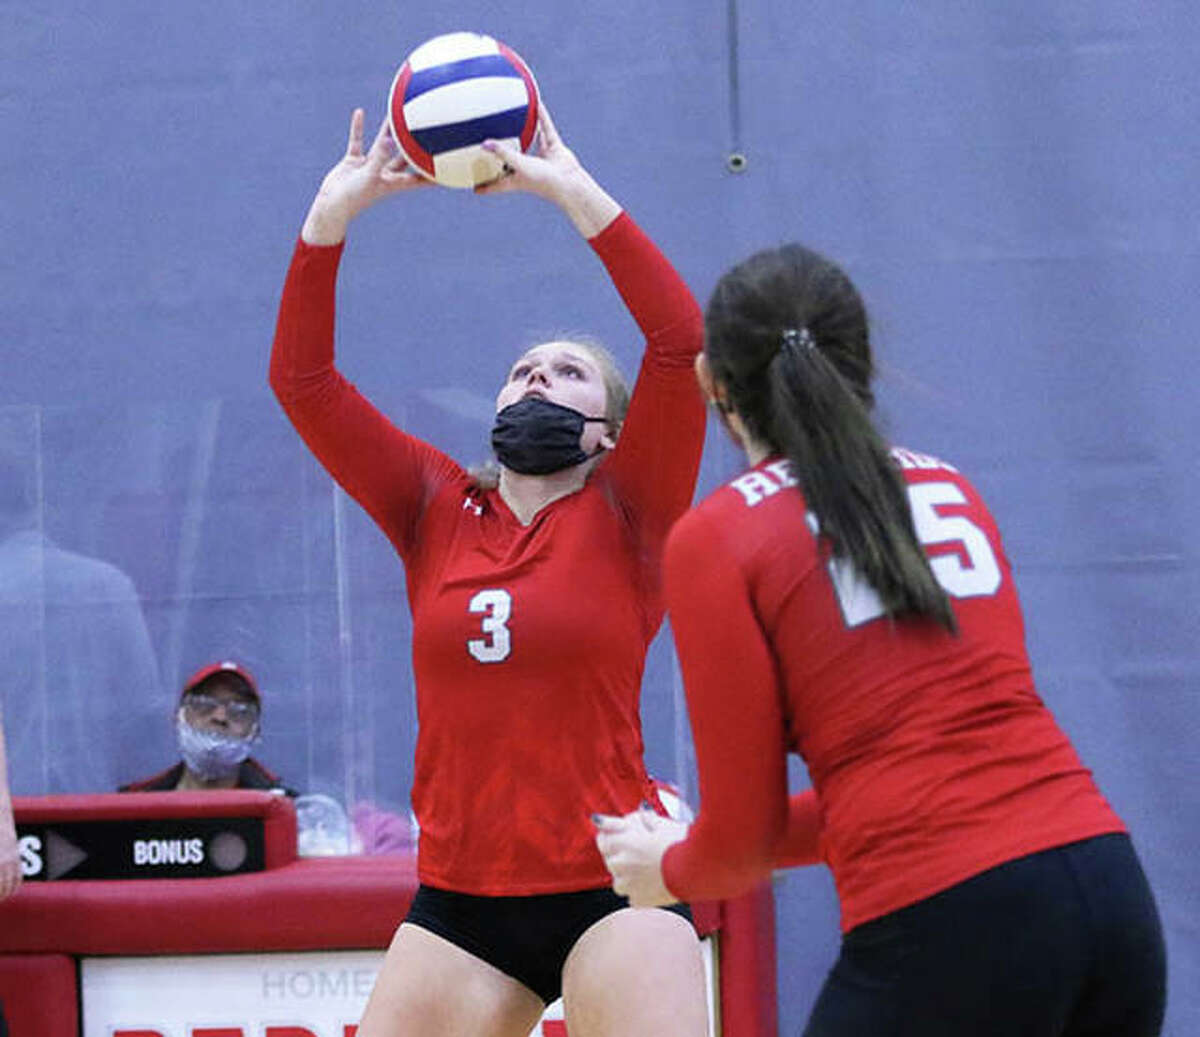 Alton’s Taylor Freer (3) sets while teammate Brooke Wolff begins her approach to the net in a match earlier this season at Alton High in Godfrey. On Saturday in Bethalto, Freer had 20 assists and Wolff had 16 kills in two matches that closed Alton’s season with an 8-11 record.